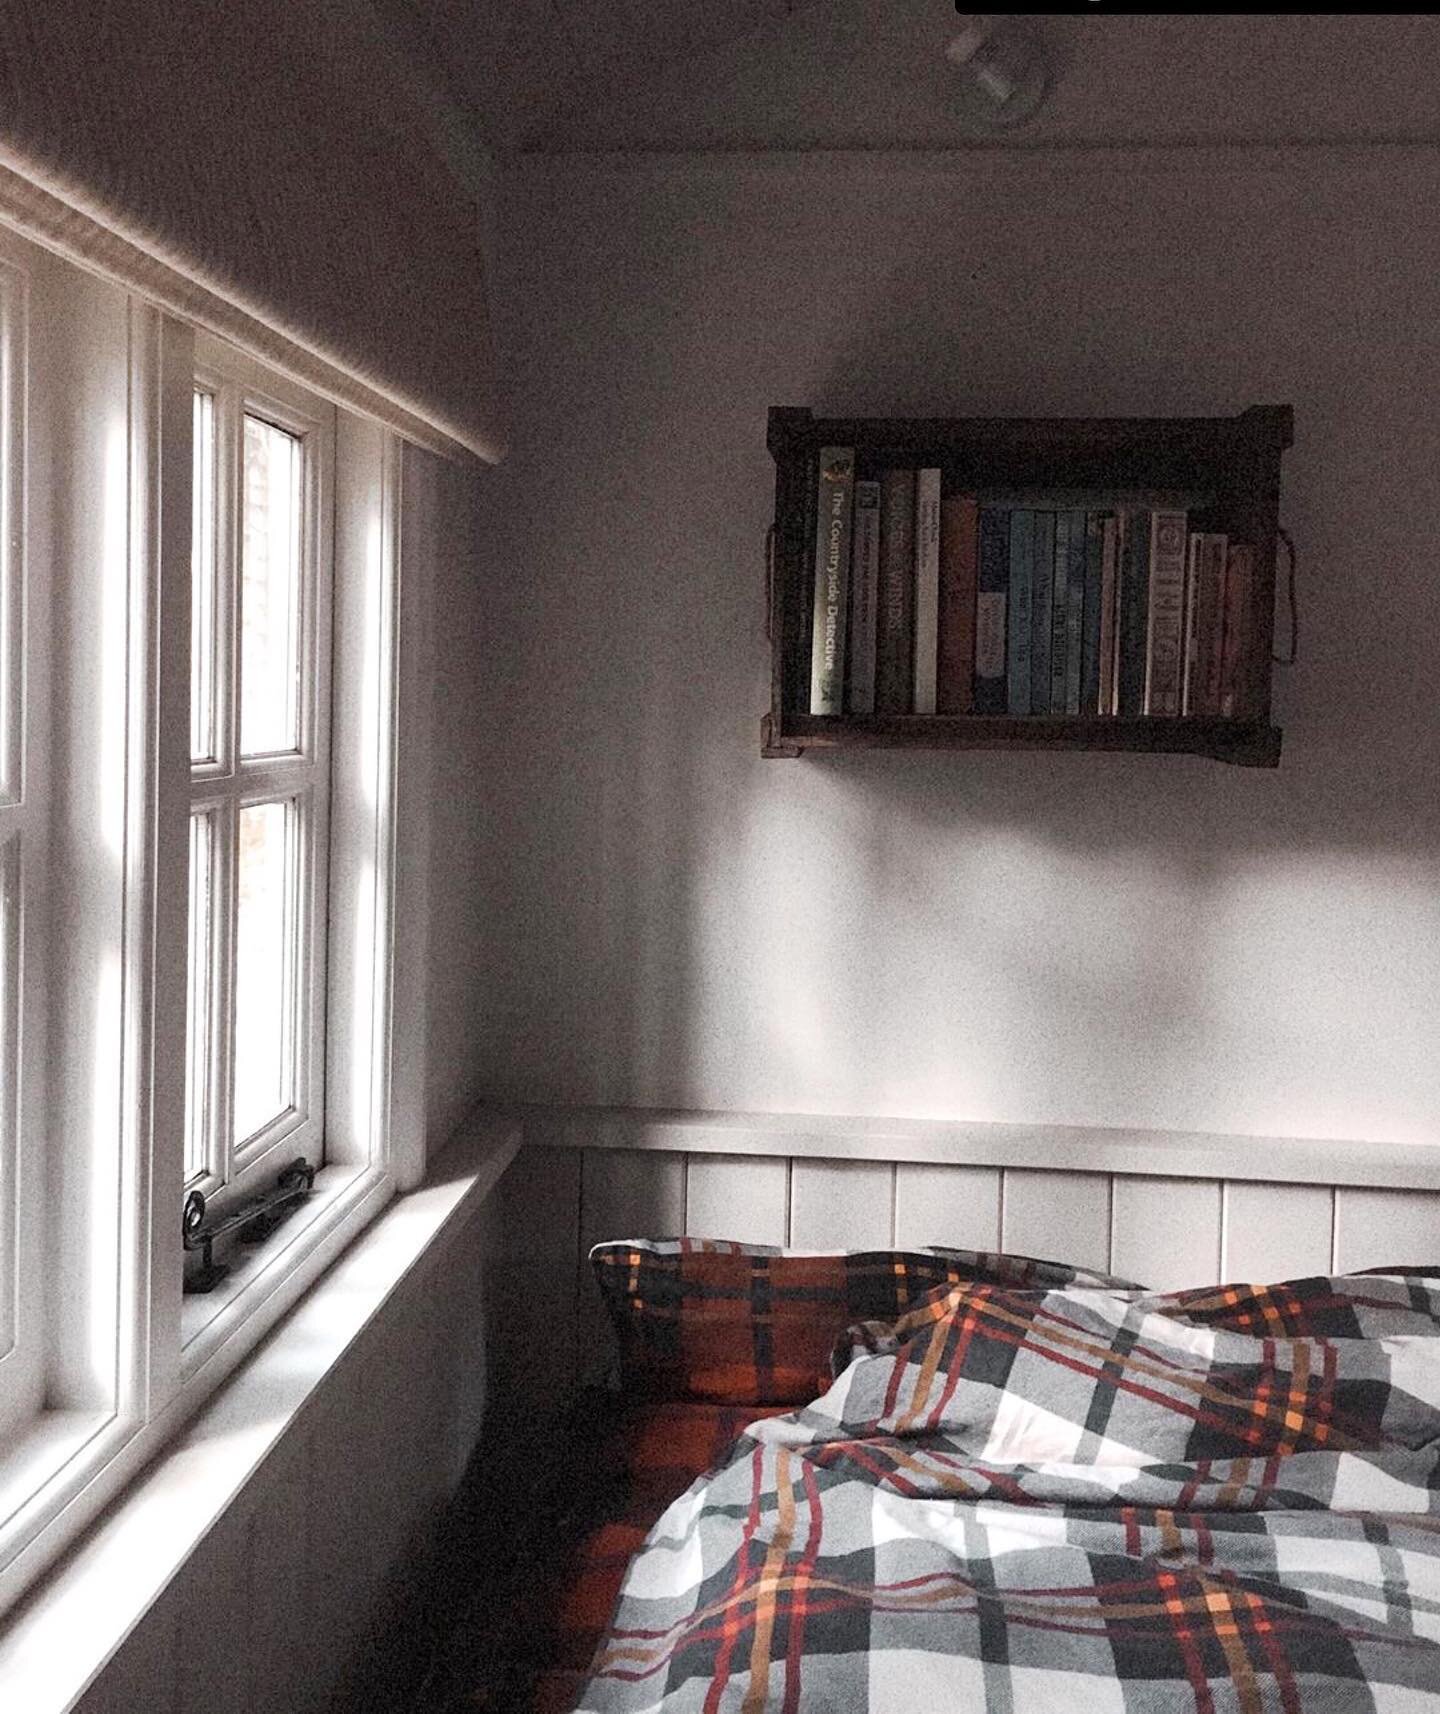 Autumn light in King Nutkin cabin. Real king size bed. Log burner. Kitchenette. Woodland garden. Availability can be found on link in bio^
*
*
*
📷 @storyofjane 
*
*
#winterescape #autumnstaycation #glampinglife #holidayathome #happyvalleynorfolk